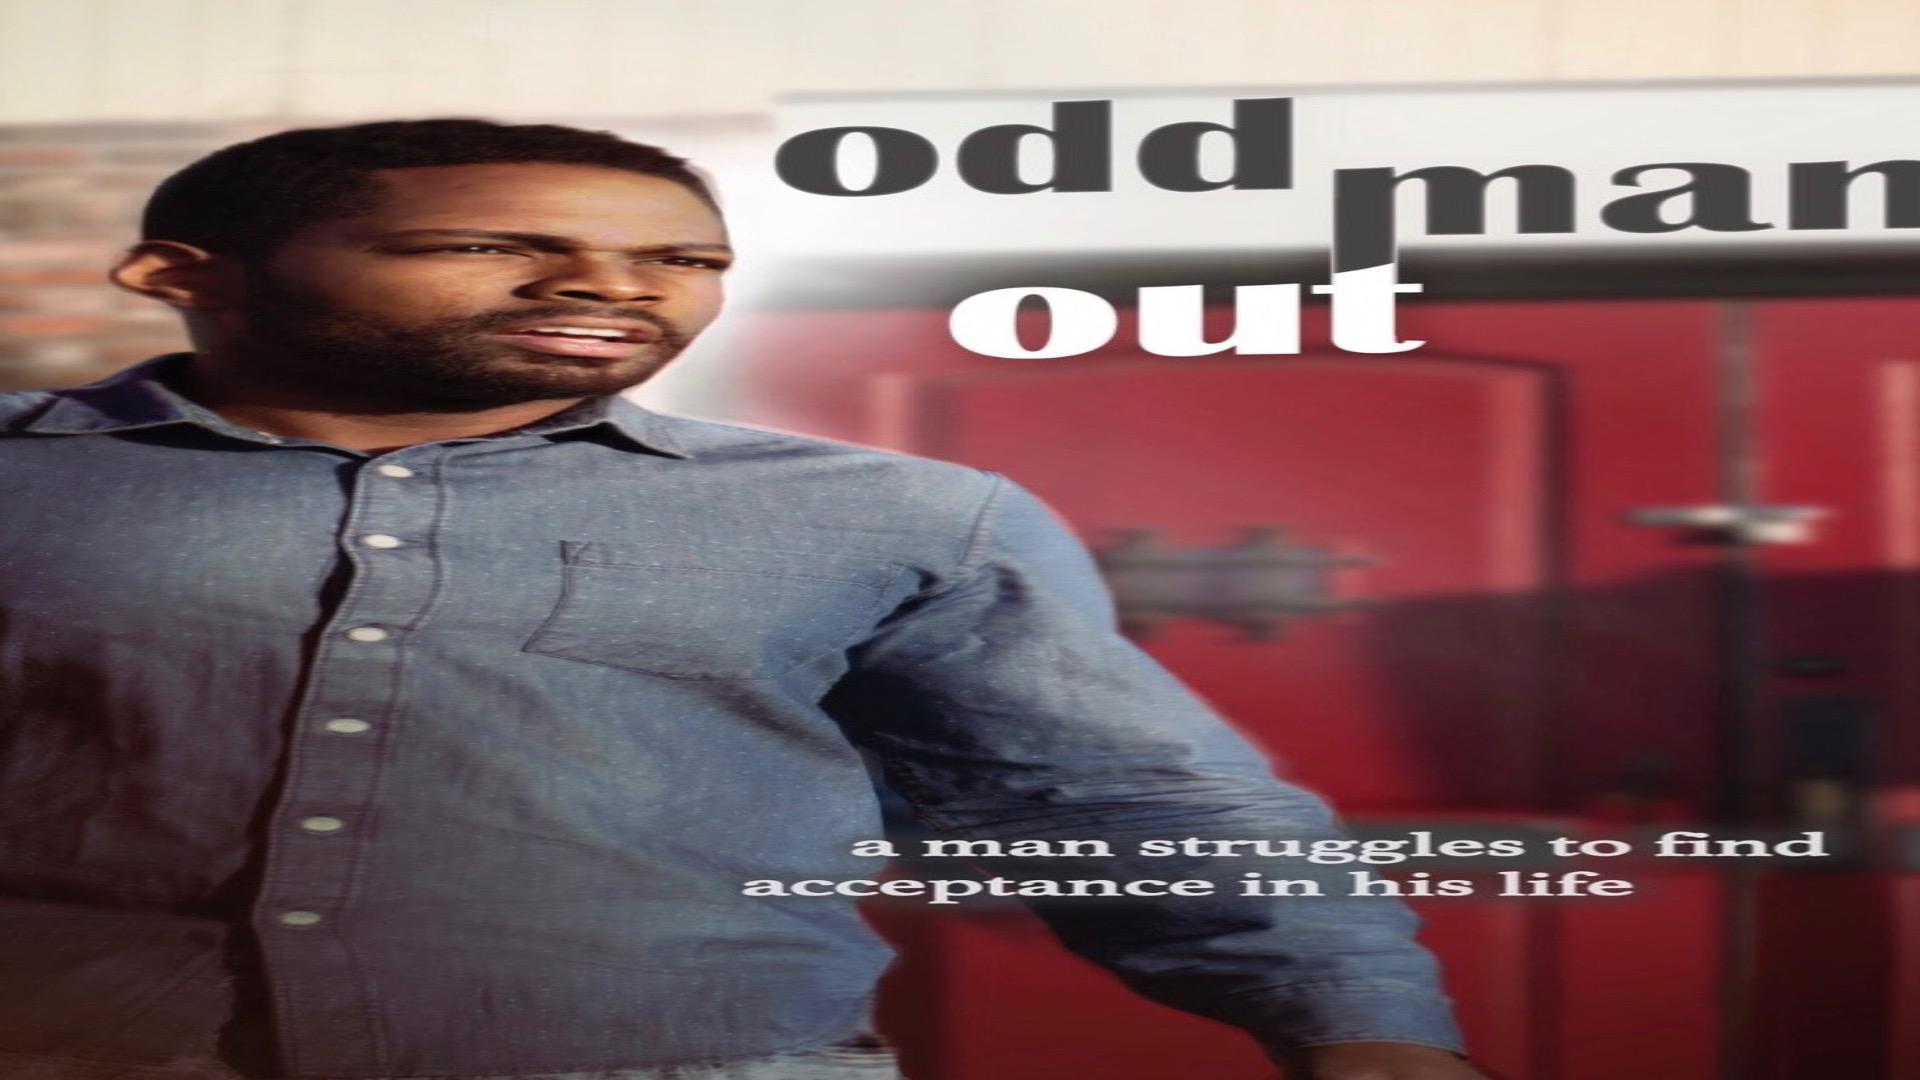 Odd Man Out: The Series